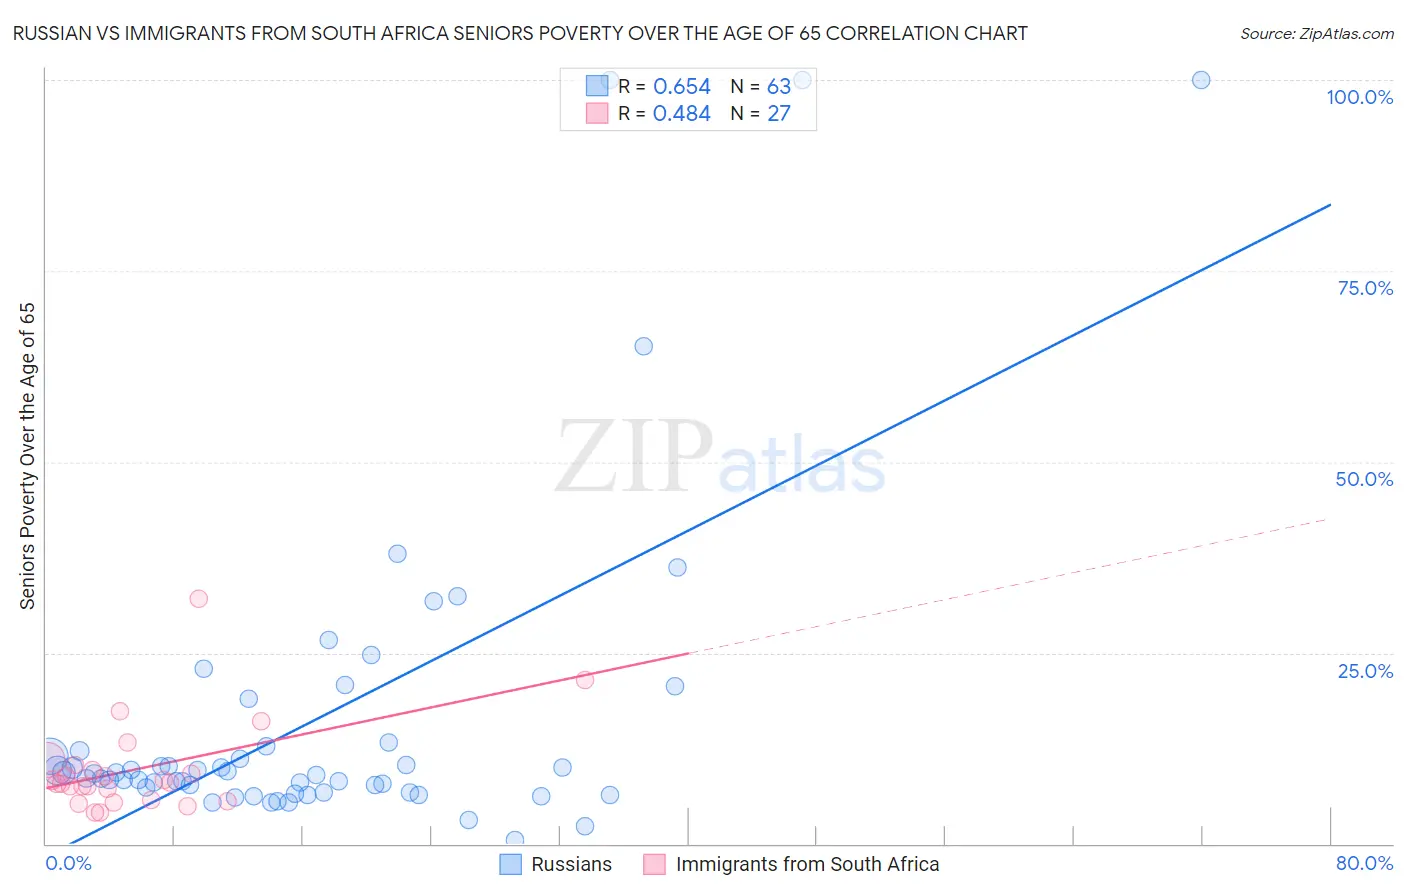 Russian vs Immigrants from South Africa Seniors Poverty Over the Age of 65